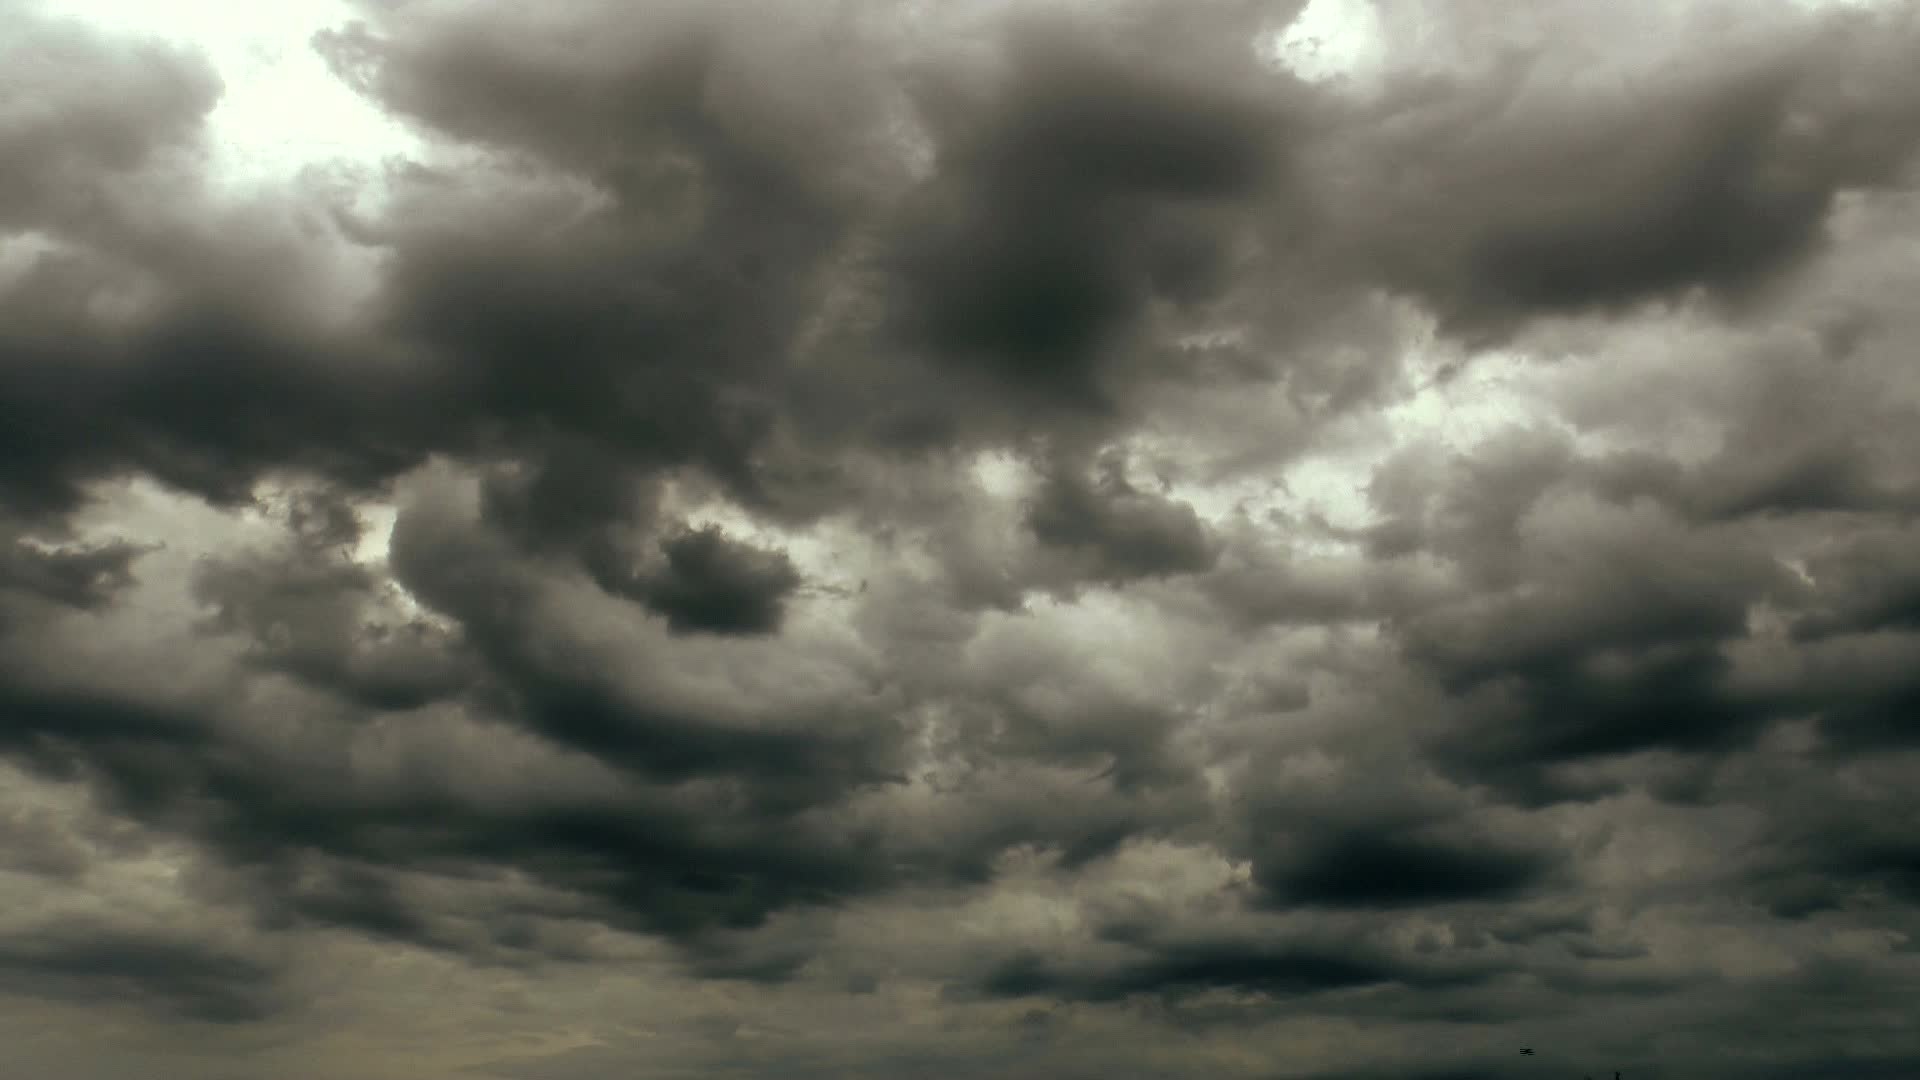 Gray Cloudy Sky: Glimpse of the sun, A cloud with a deep bruised gray or blackish underside, An impending rain. 1920x1080 Full HD Wallpaper.